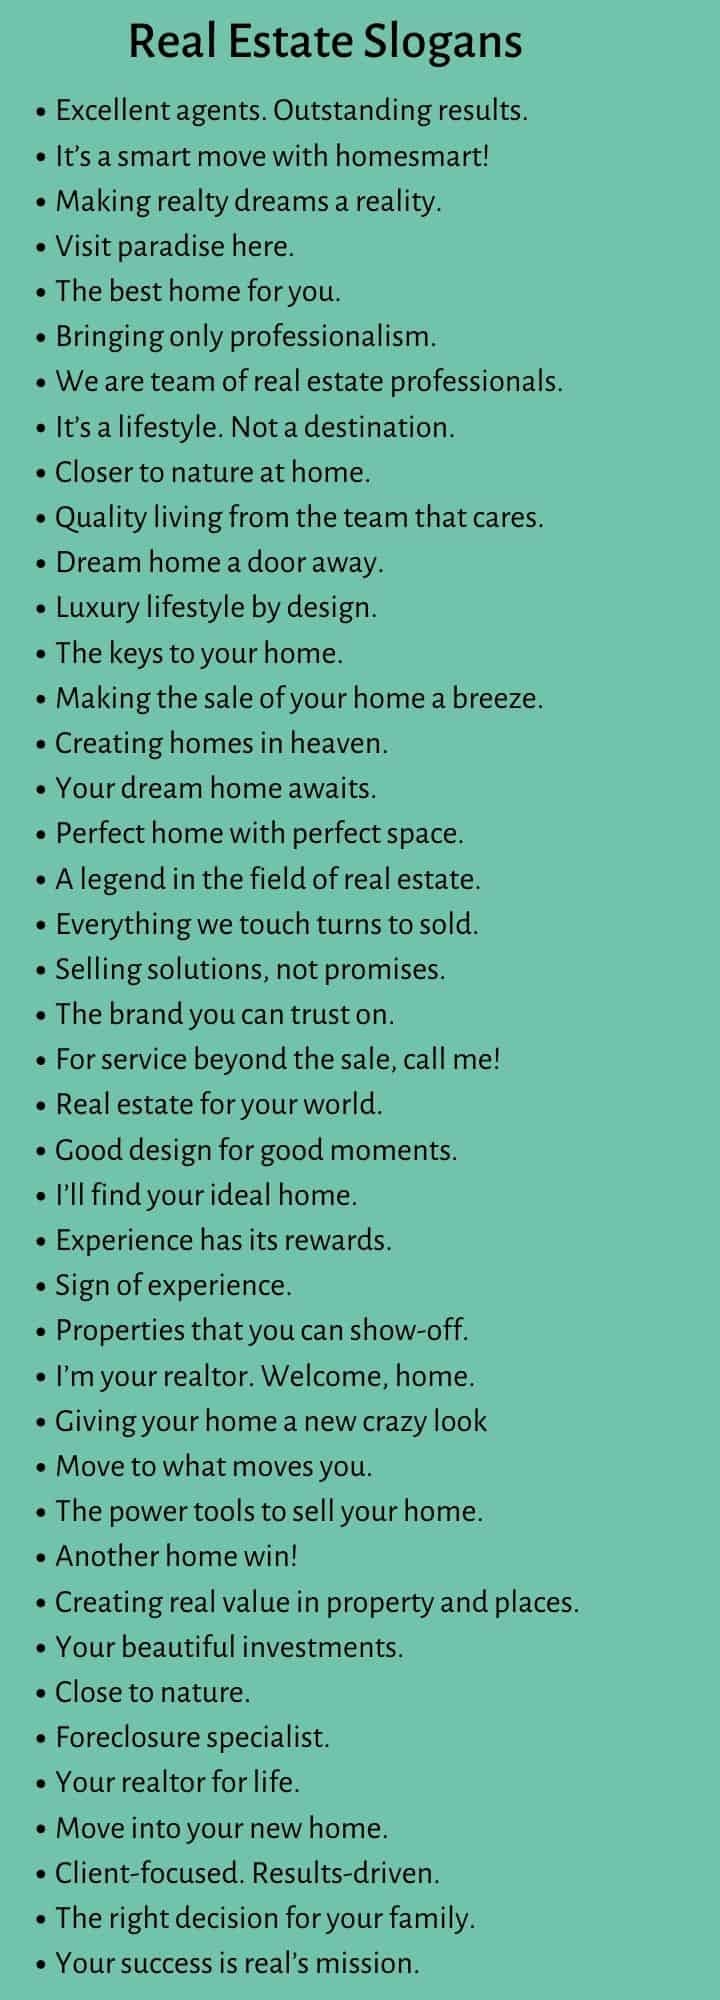 Real Estate Slogans: 300+ Best Real Estate Taglines and Sayings -